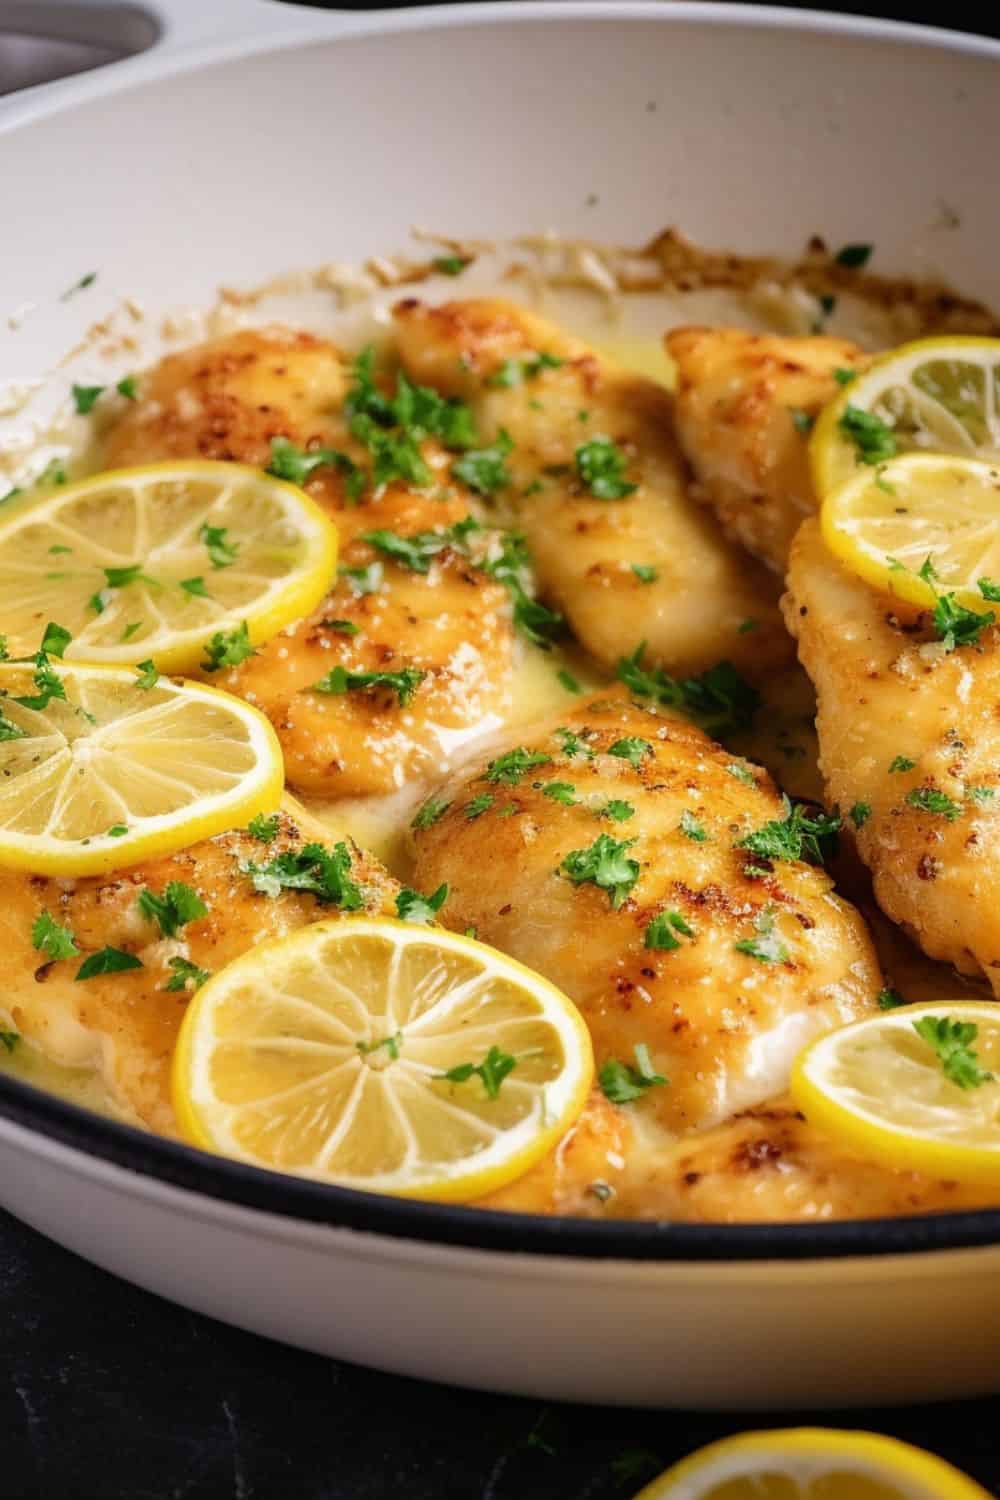 A family-style serving of Lemon Butter Chicken, ready for dinner, with steam rising from the lemony sauce.